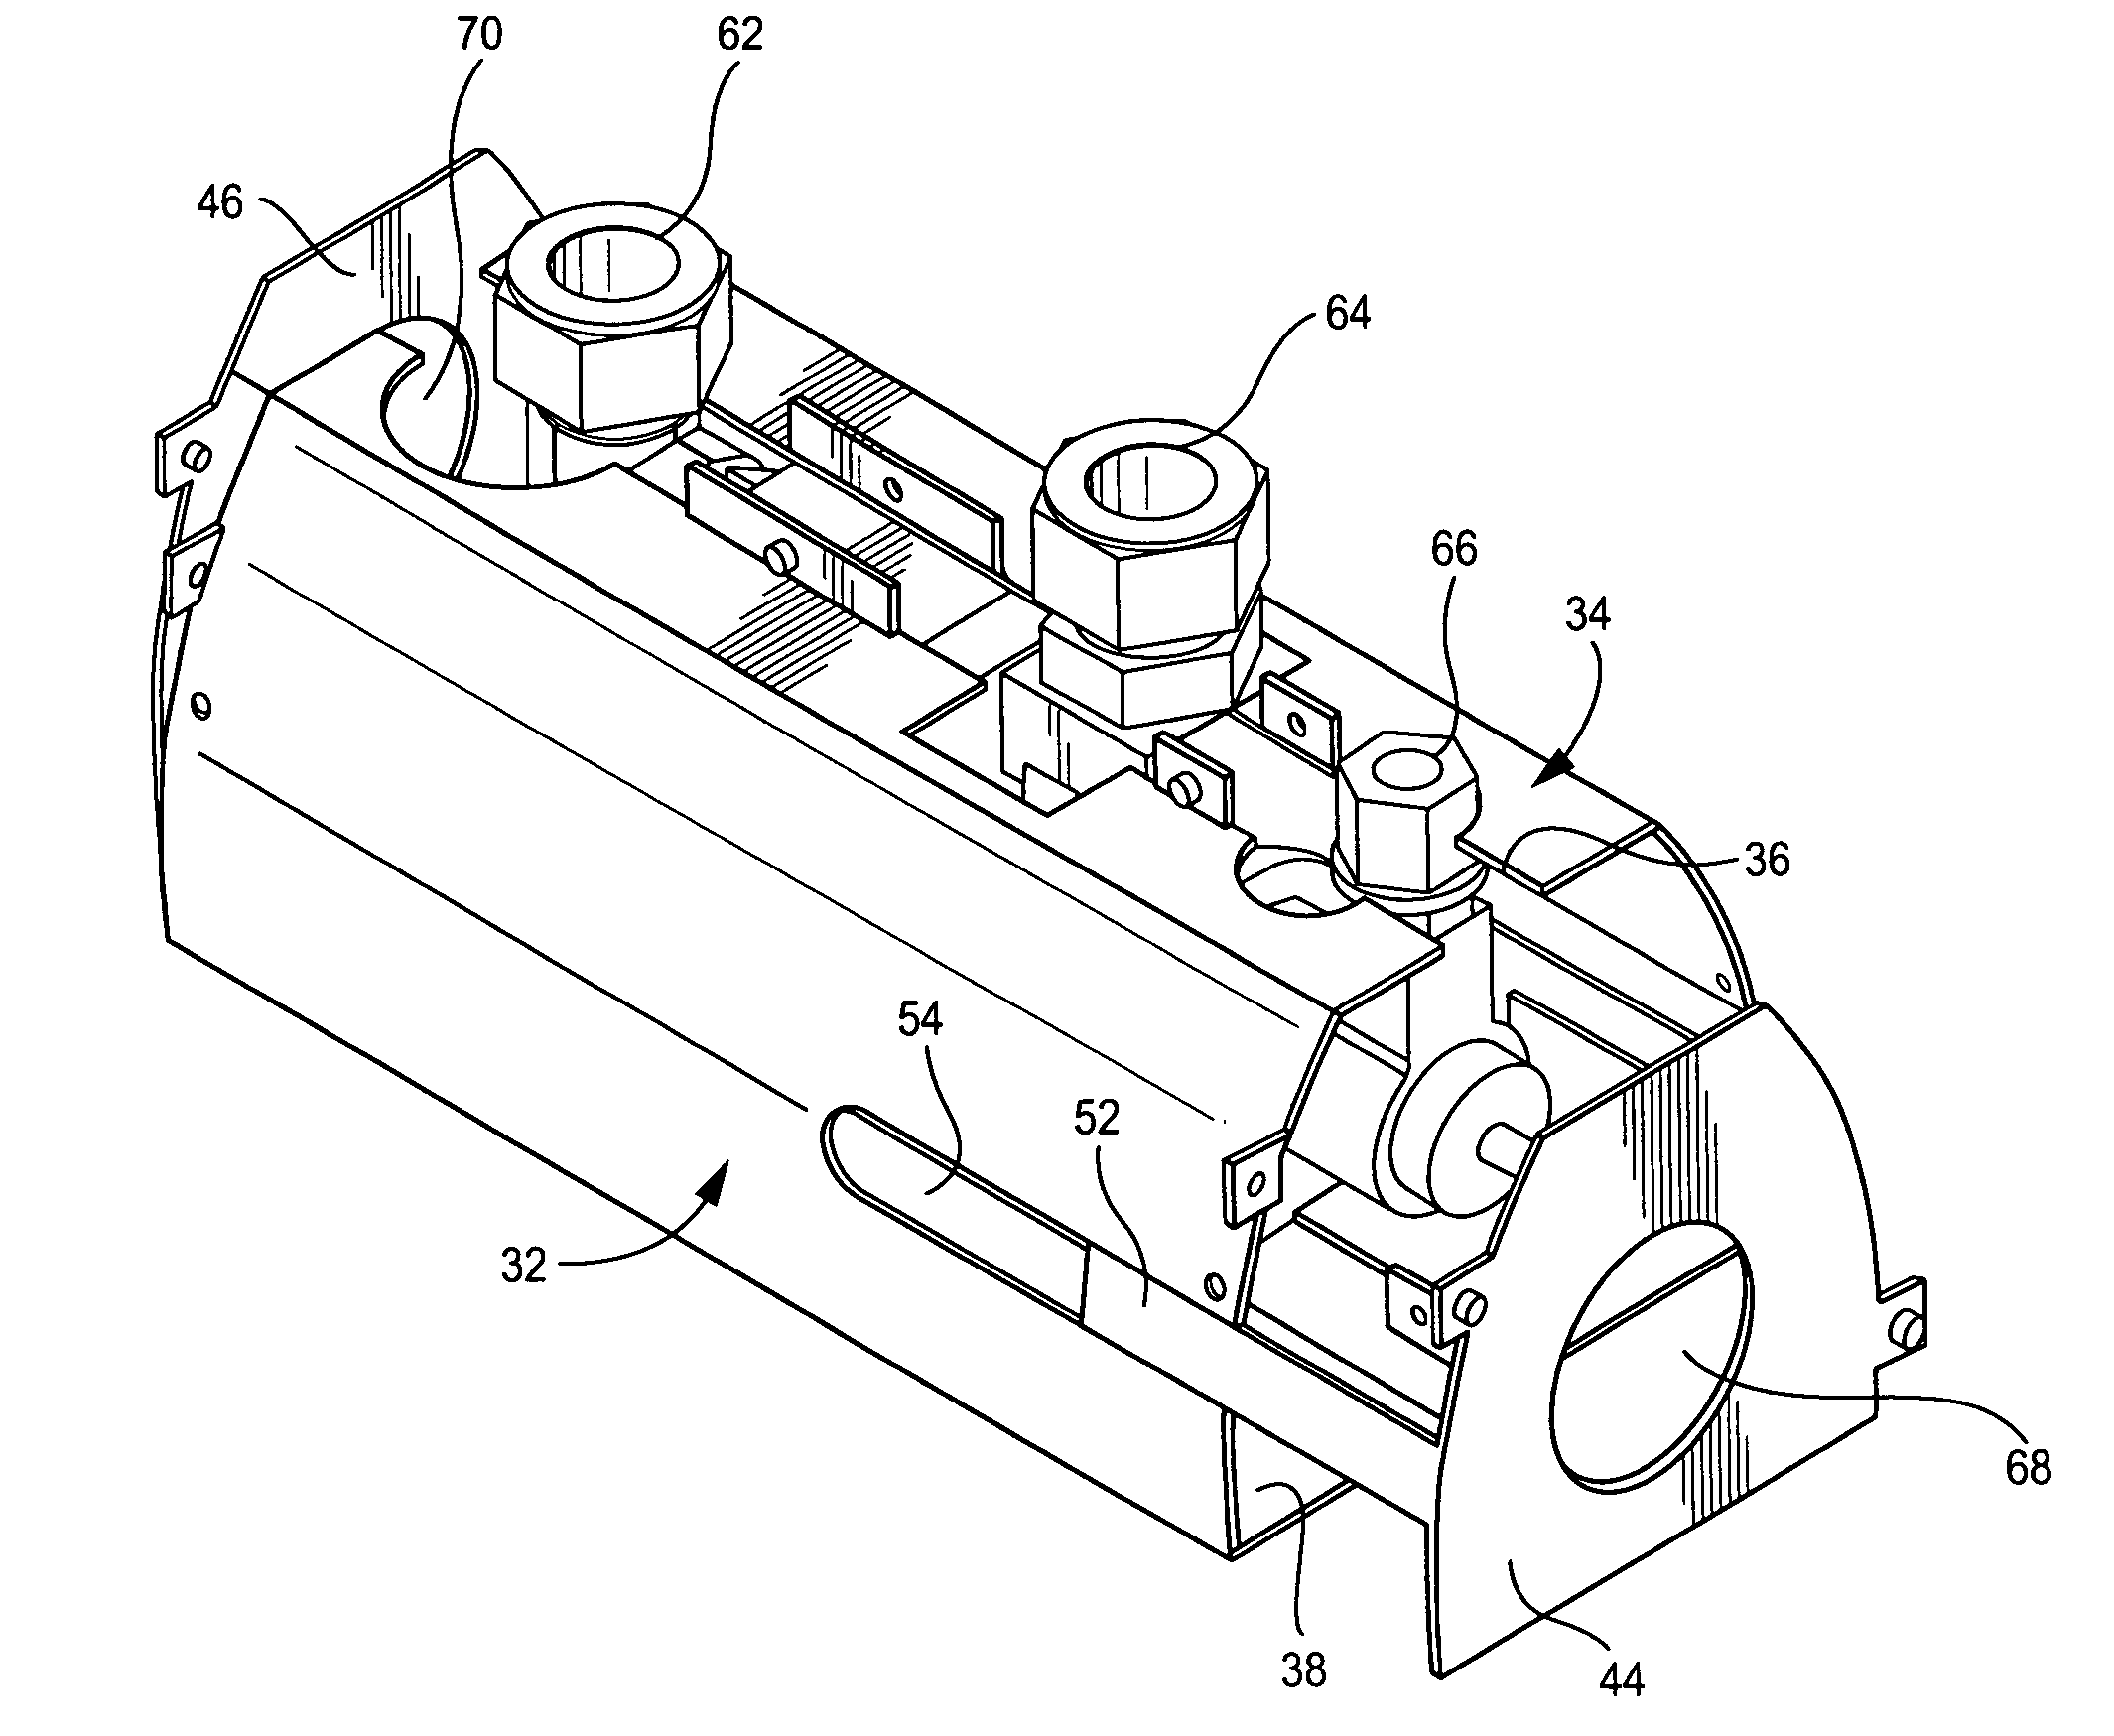 Air cooling apparatus for a purge valve